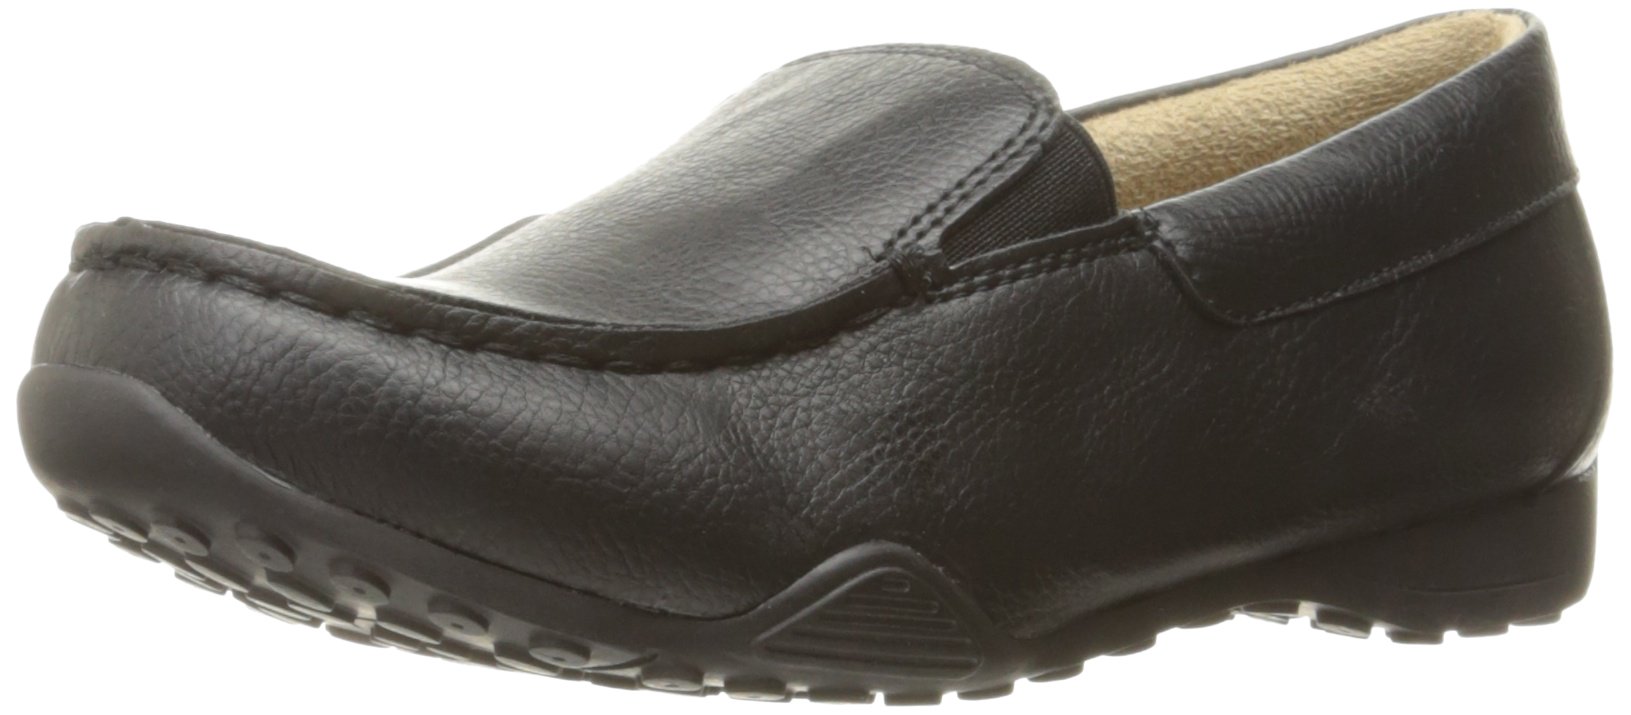 The Children's Place Boys Slip On Loafer Shoes